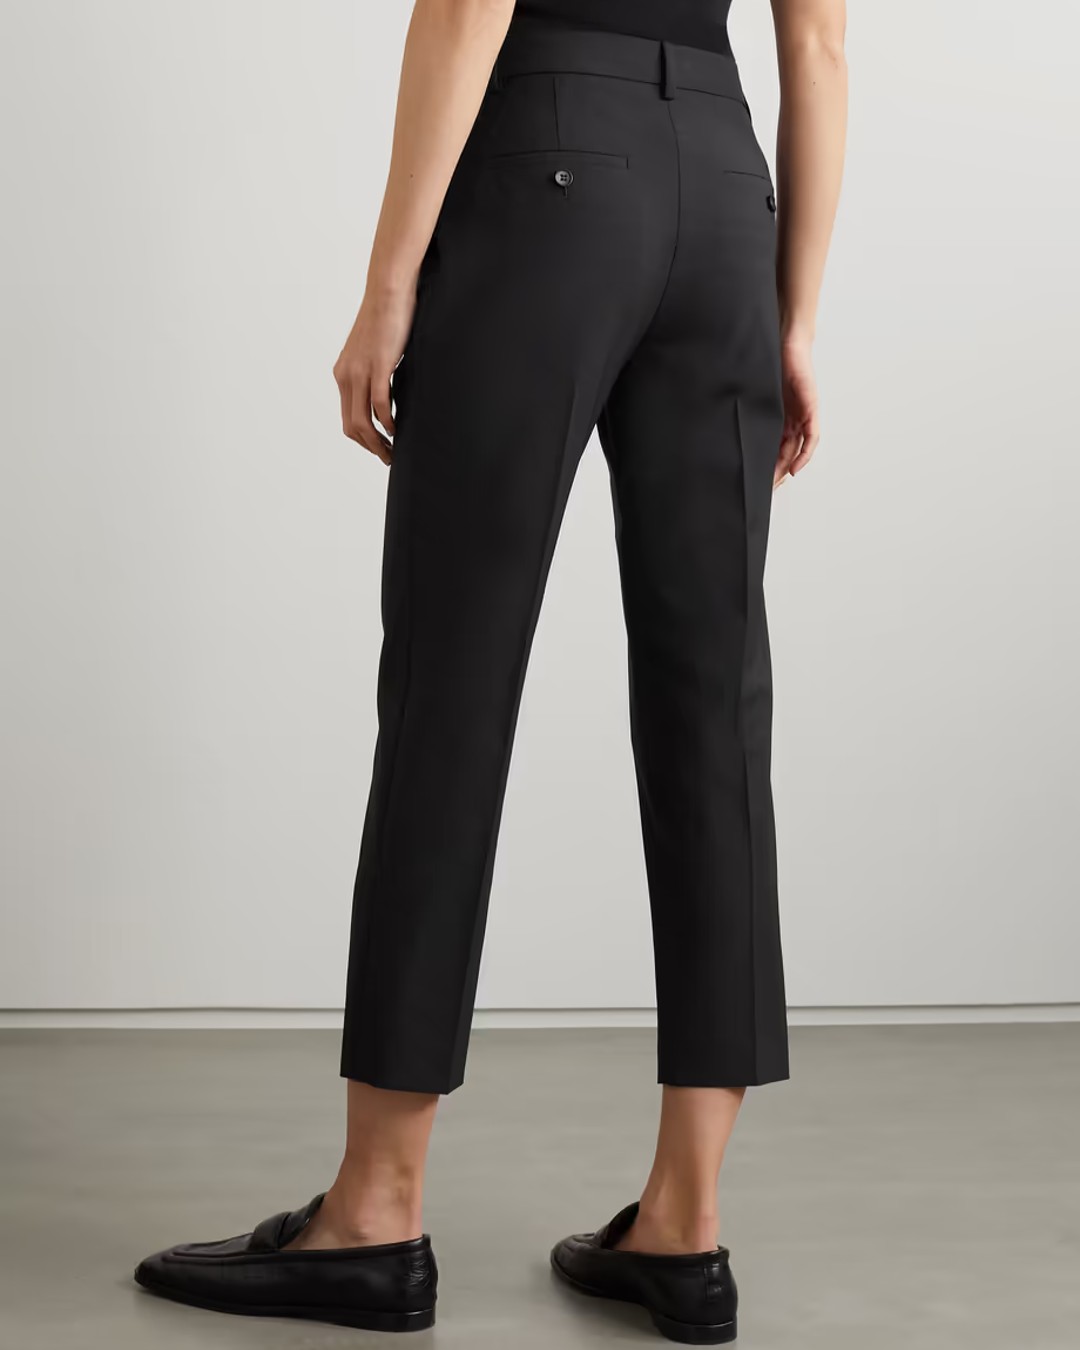 The Best Black Pants To Take You From Work To Play | URBAN LIST GLOBAL